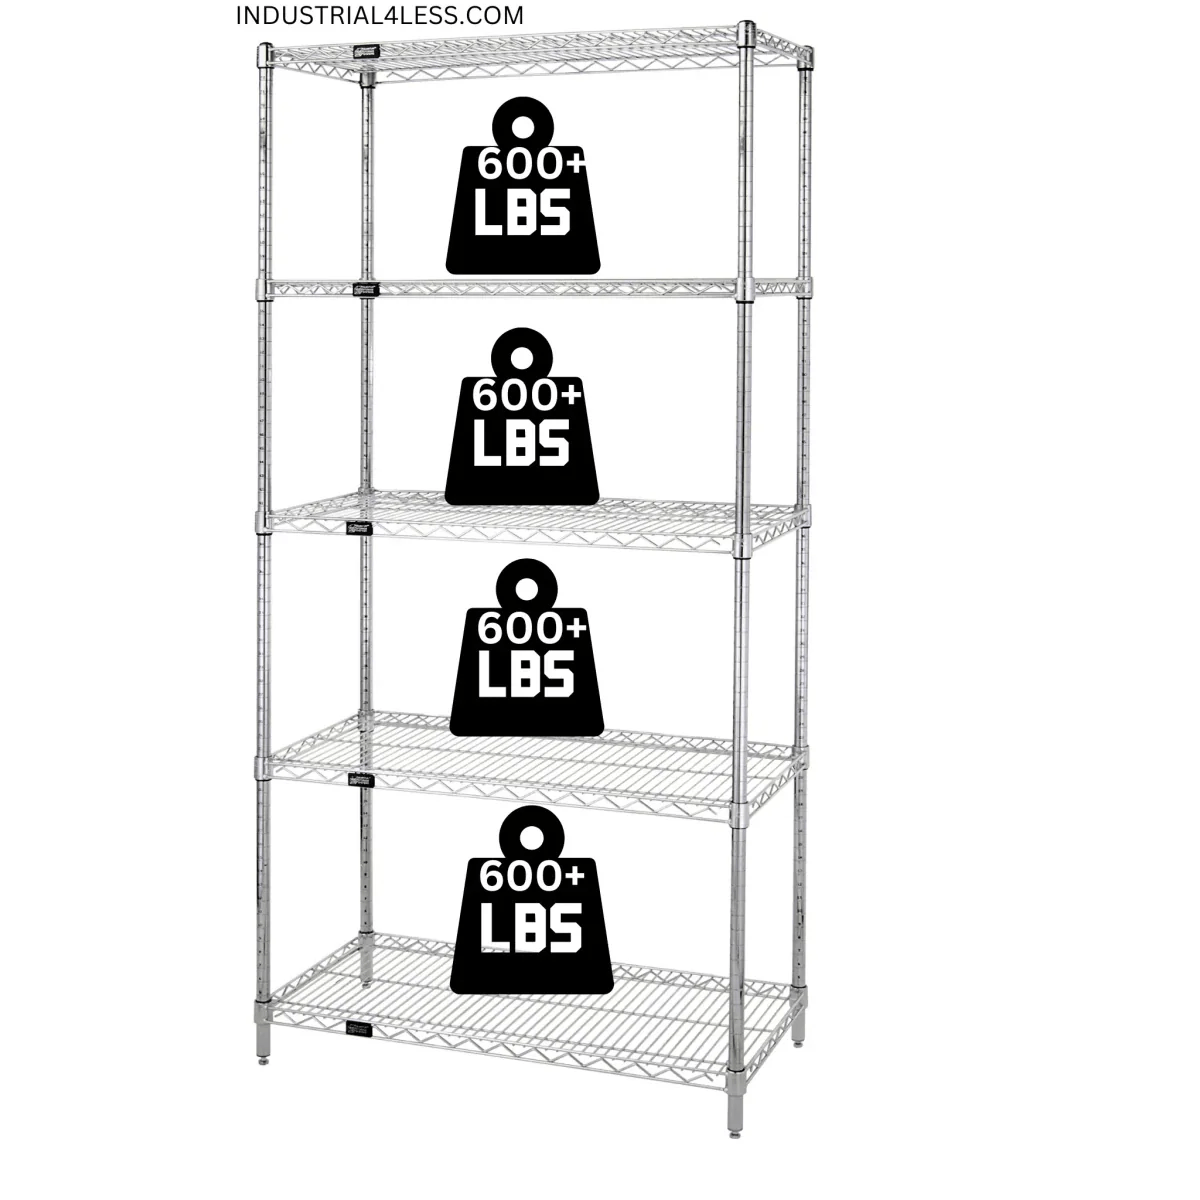 14" x 42" Stainless Steel Wire Shelving Unit - Industrial 4 Less - 14425S-5